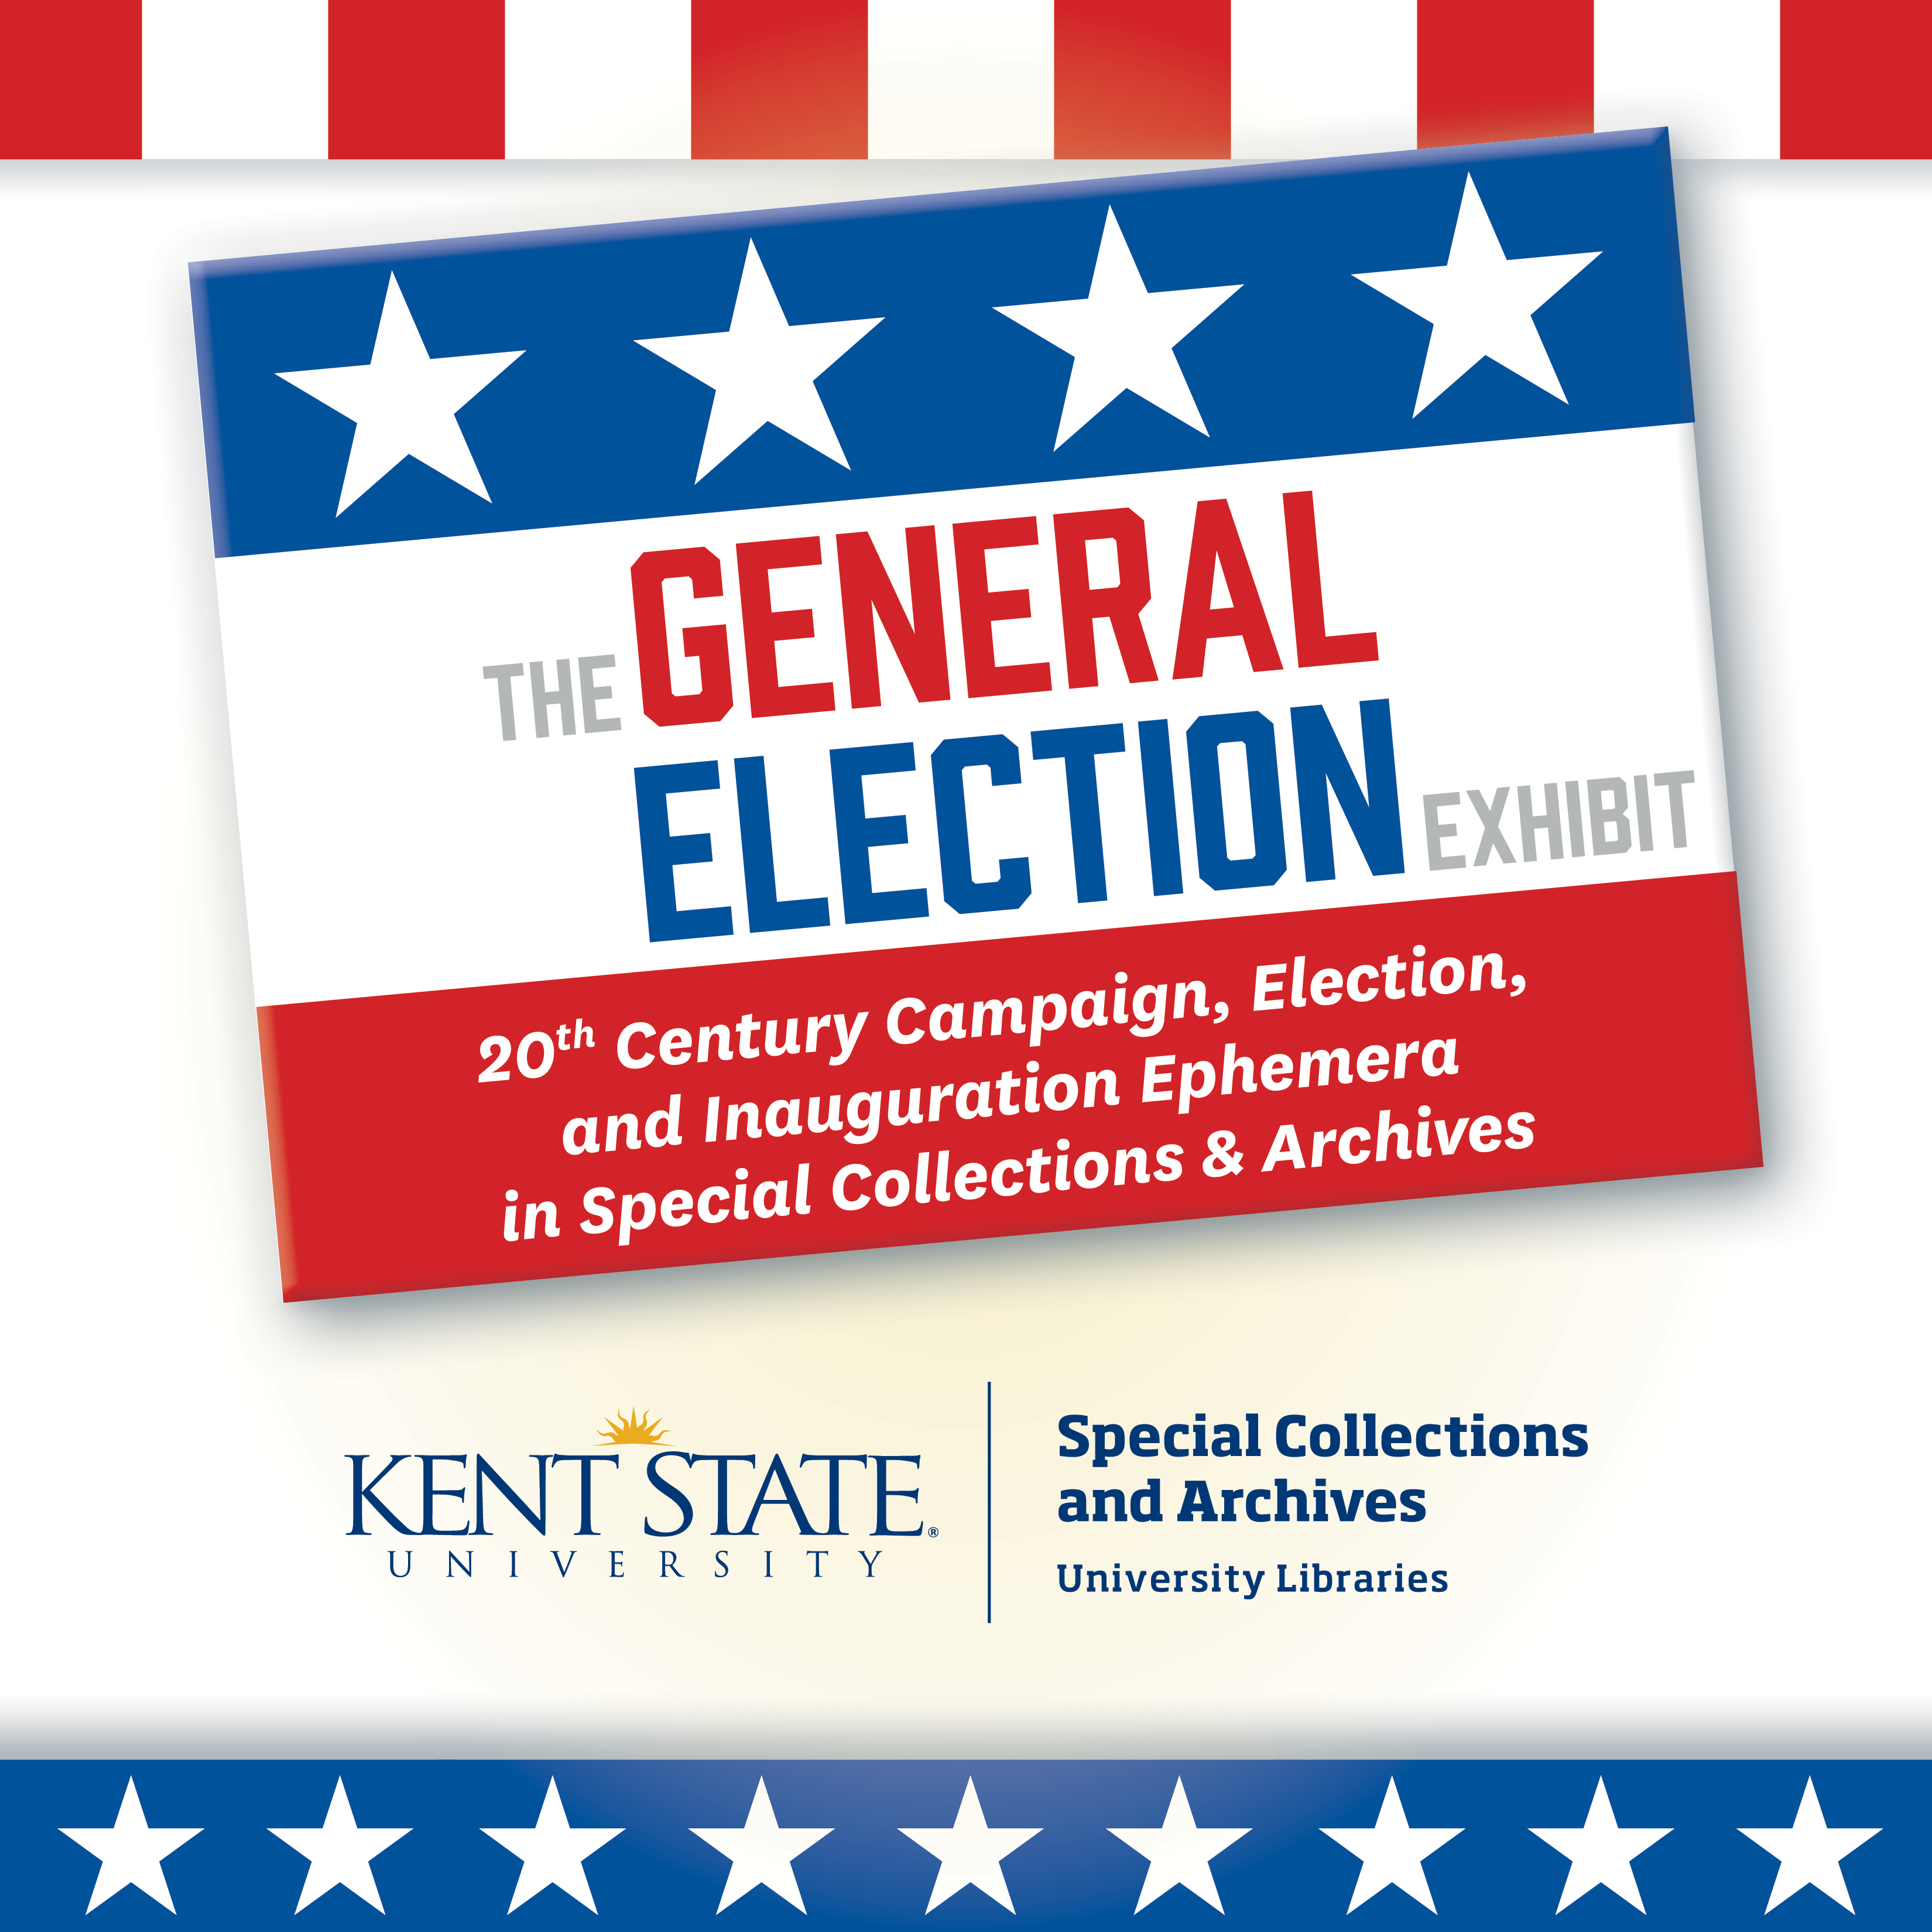 Title of Exhibit: The General Election Exhibit: 20th Century Campaign, Election, and Inauguration Ephemera in Special Colletions & Archives The title is written in red, white, and blue to resemble the American flag. 